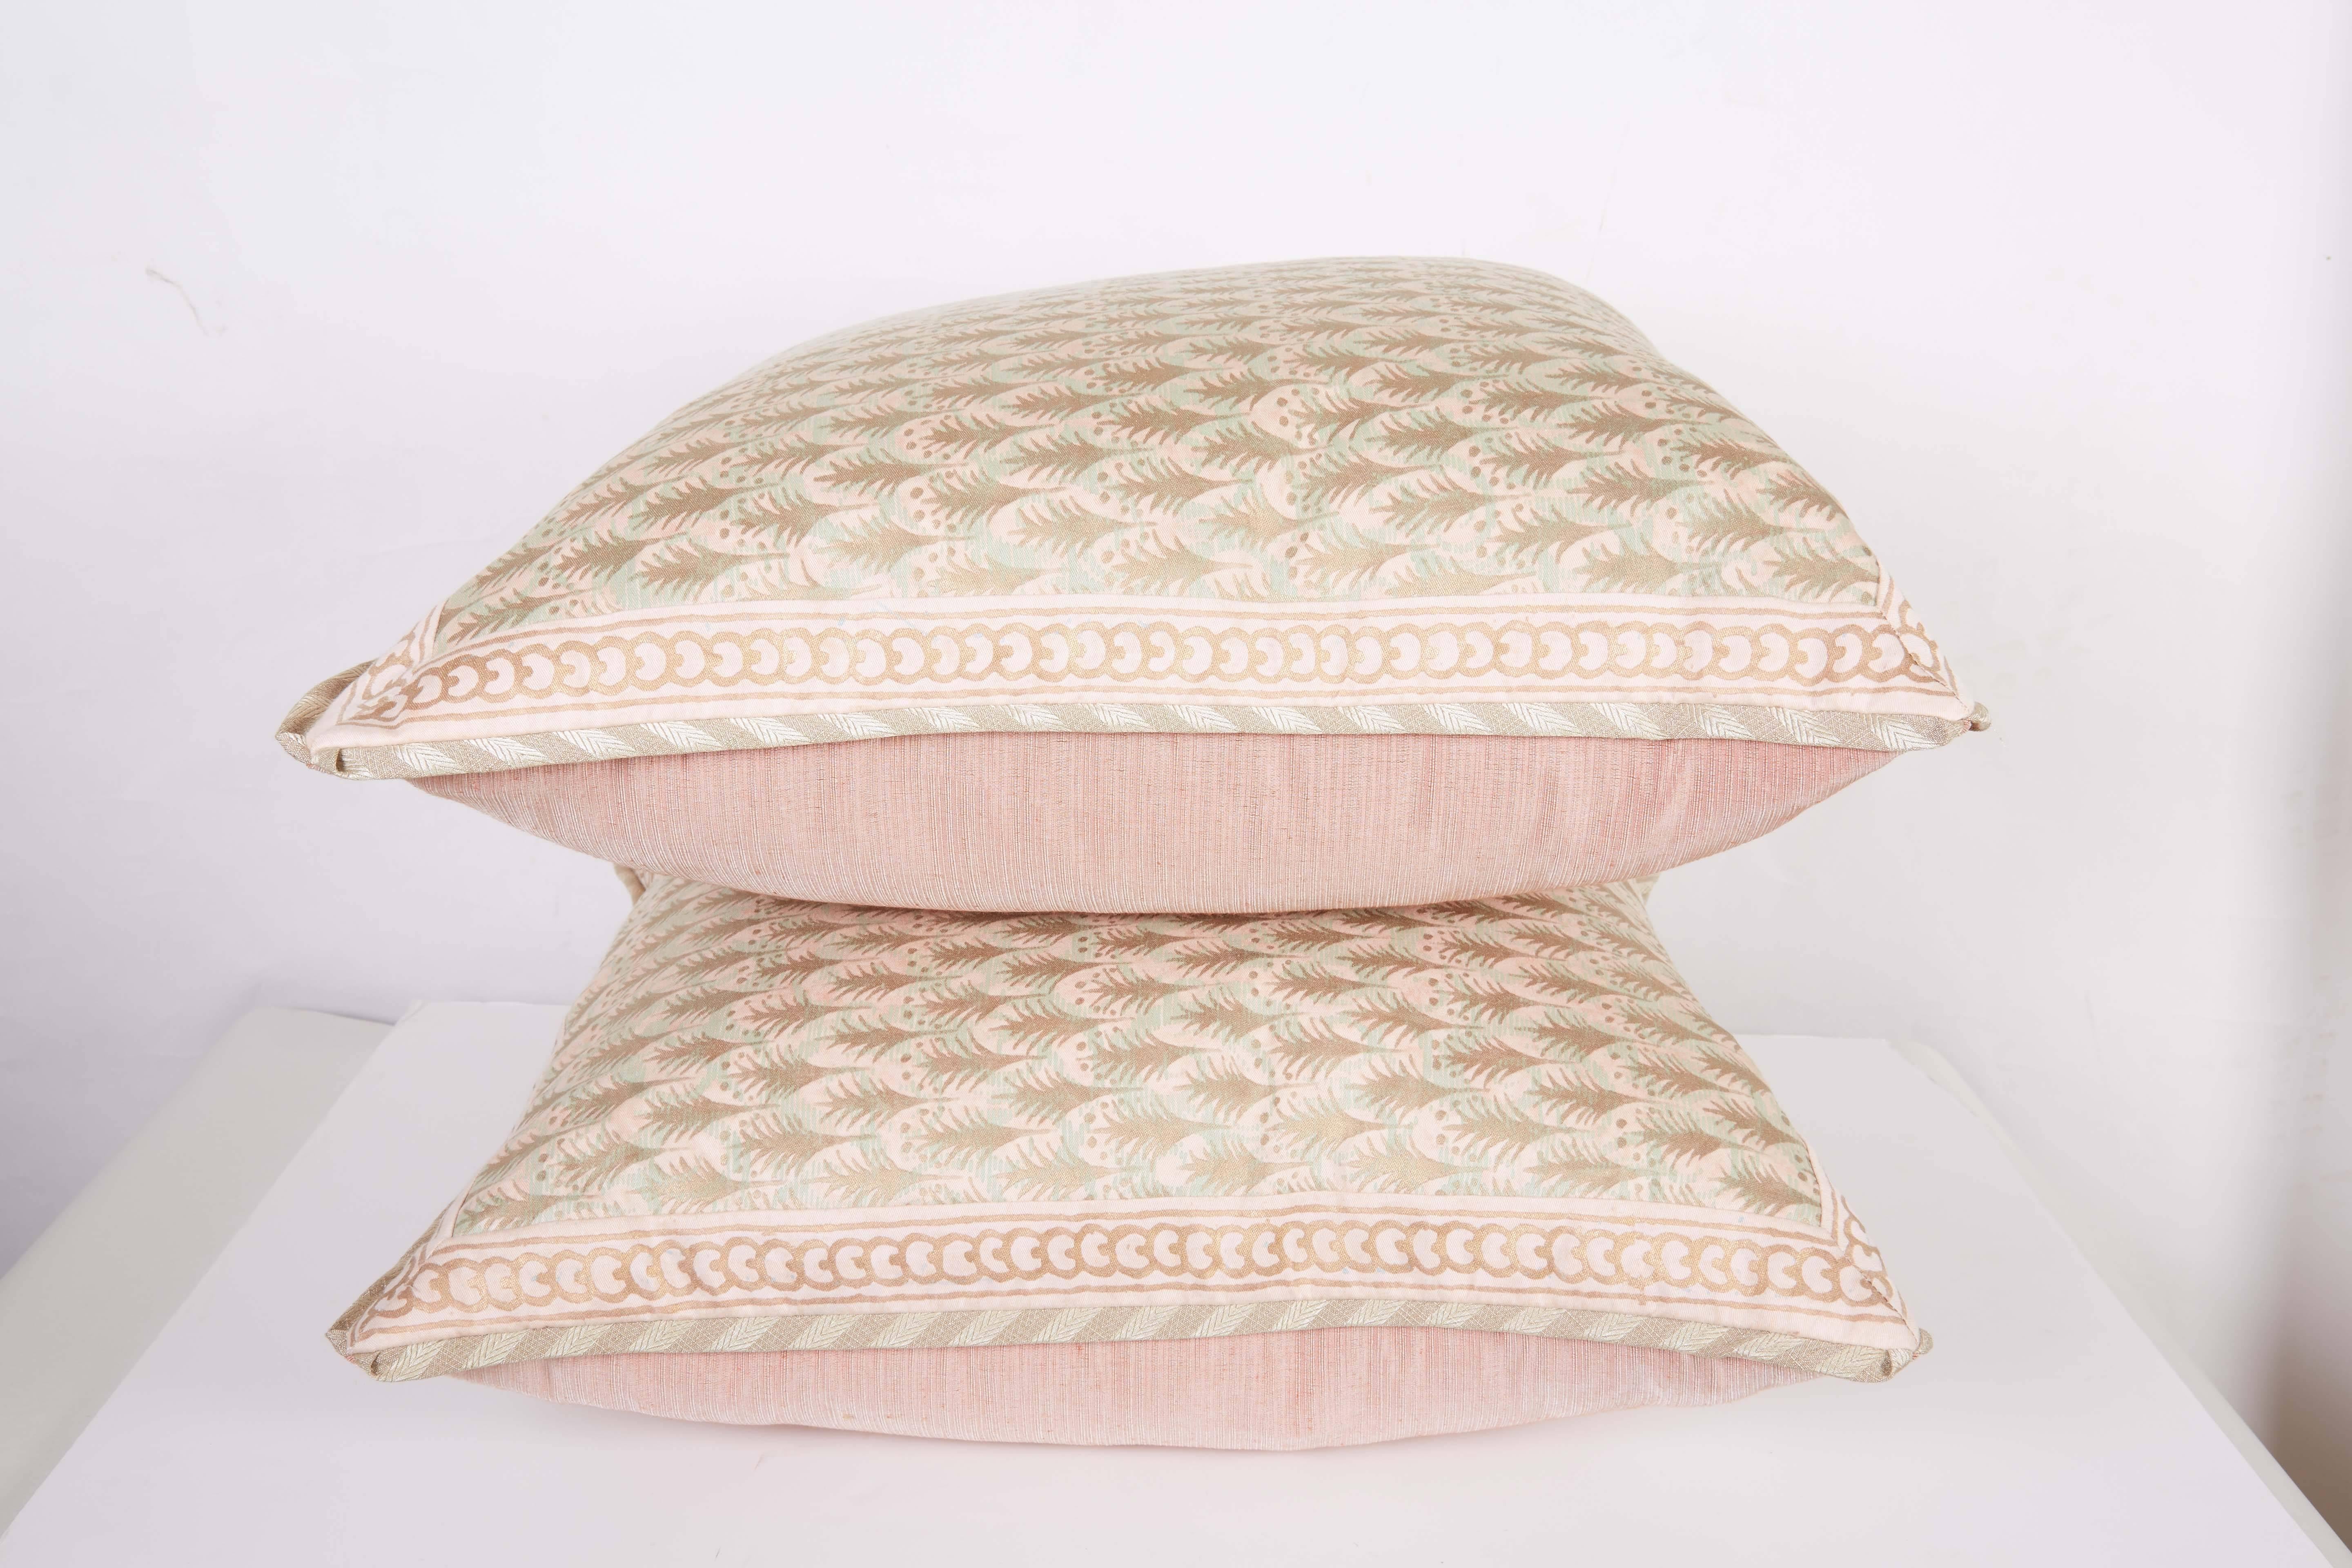 A pair of Fortuny fabric cushions in the Puimette pattern, shell pink, powder blue and gold color way with silk bias edging and Clarence House silk blend backing material, the pattern, a 15th century Persian design with feather motif and stylized